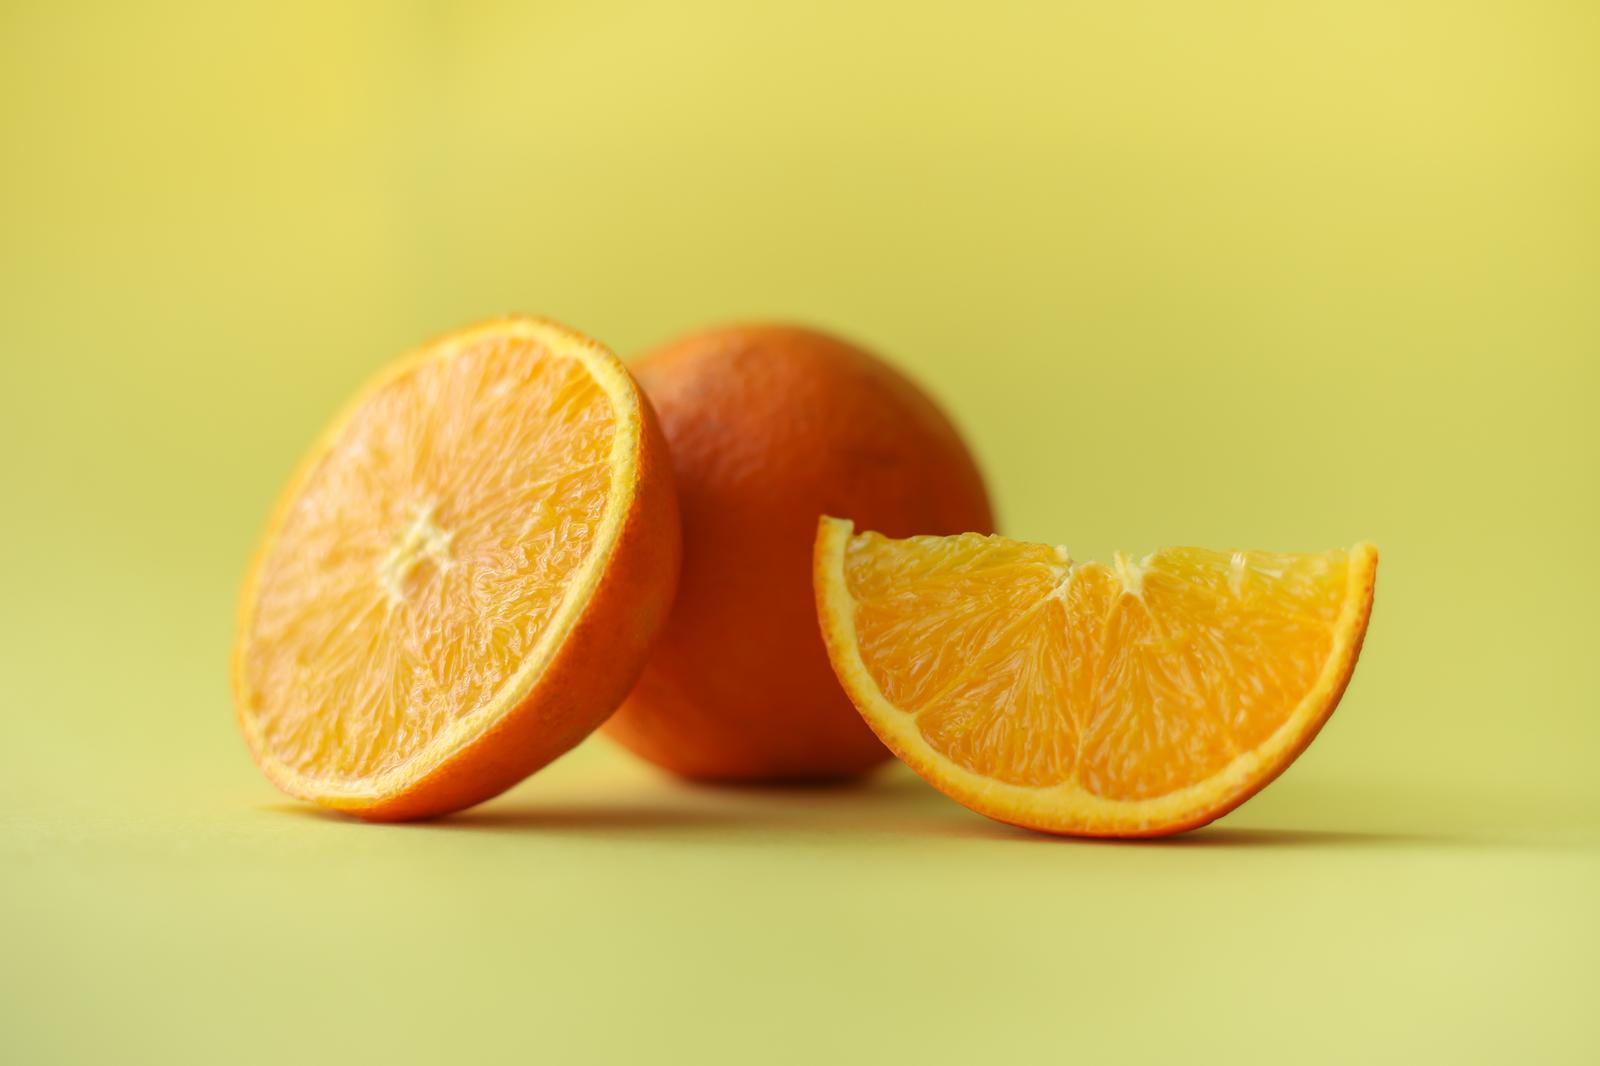 This 24-Question All-Rounded “True or False” Quiz Will Determine If You Know Enough Orange